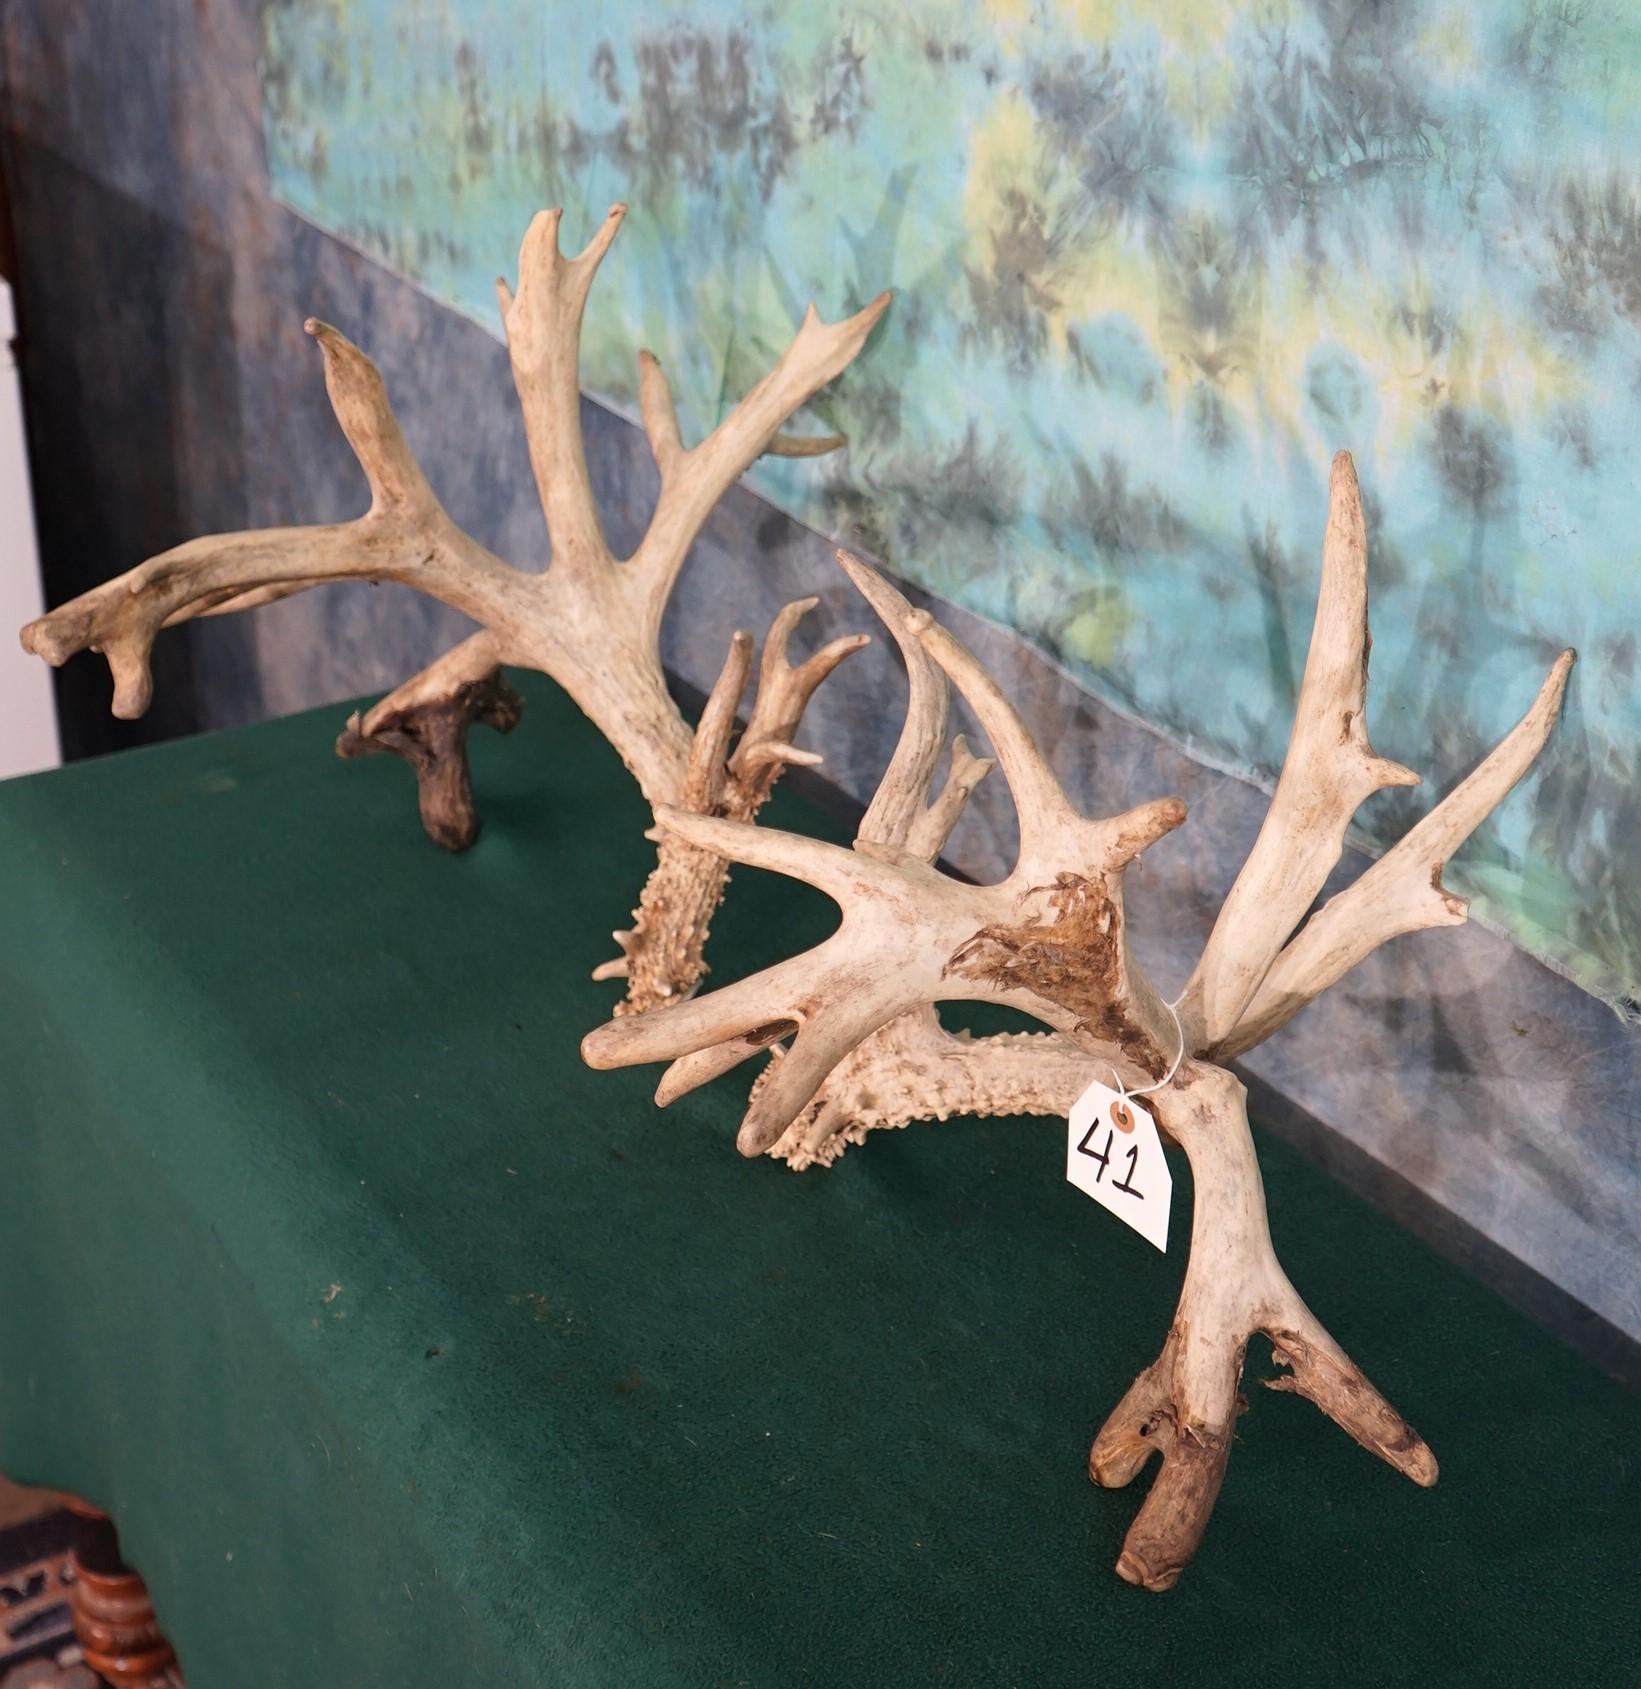 Big 212 gross  set of Non-Typical Whitetail Deer Matching Sheds Taxidermy